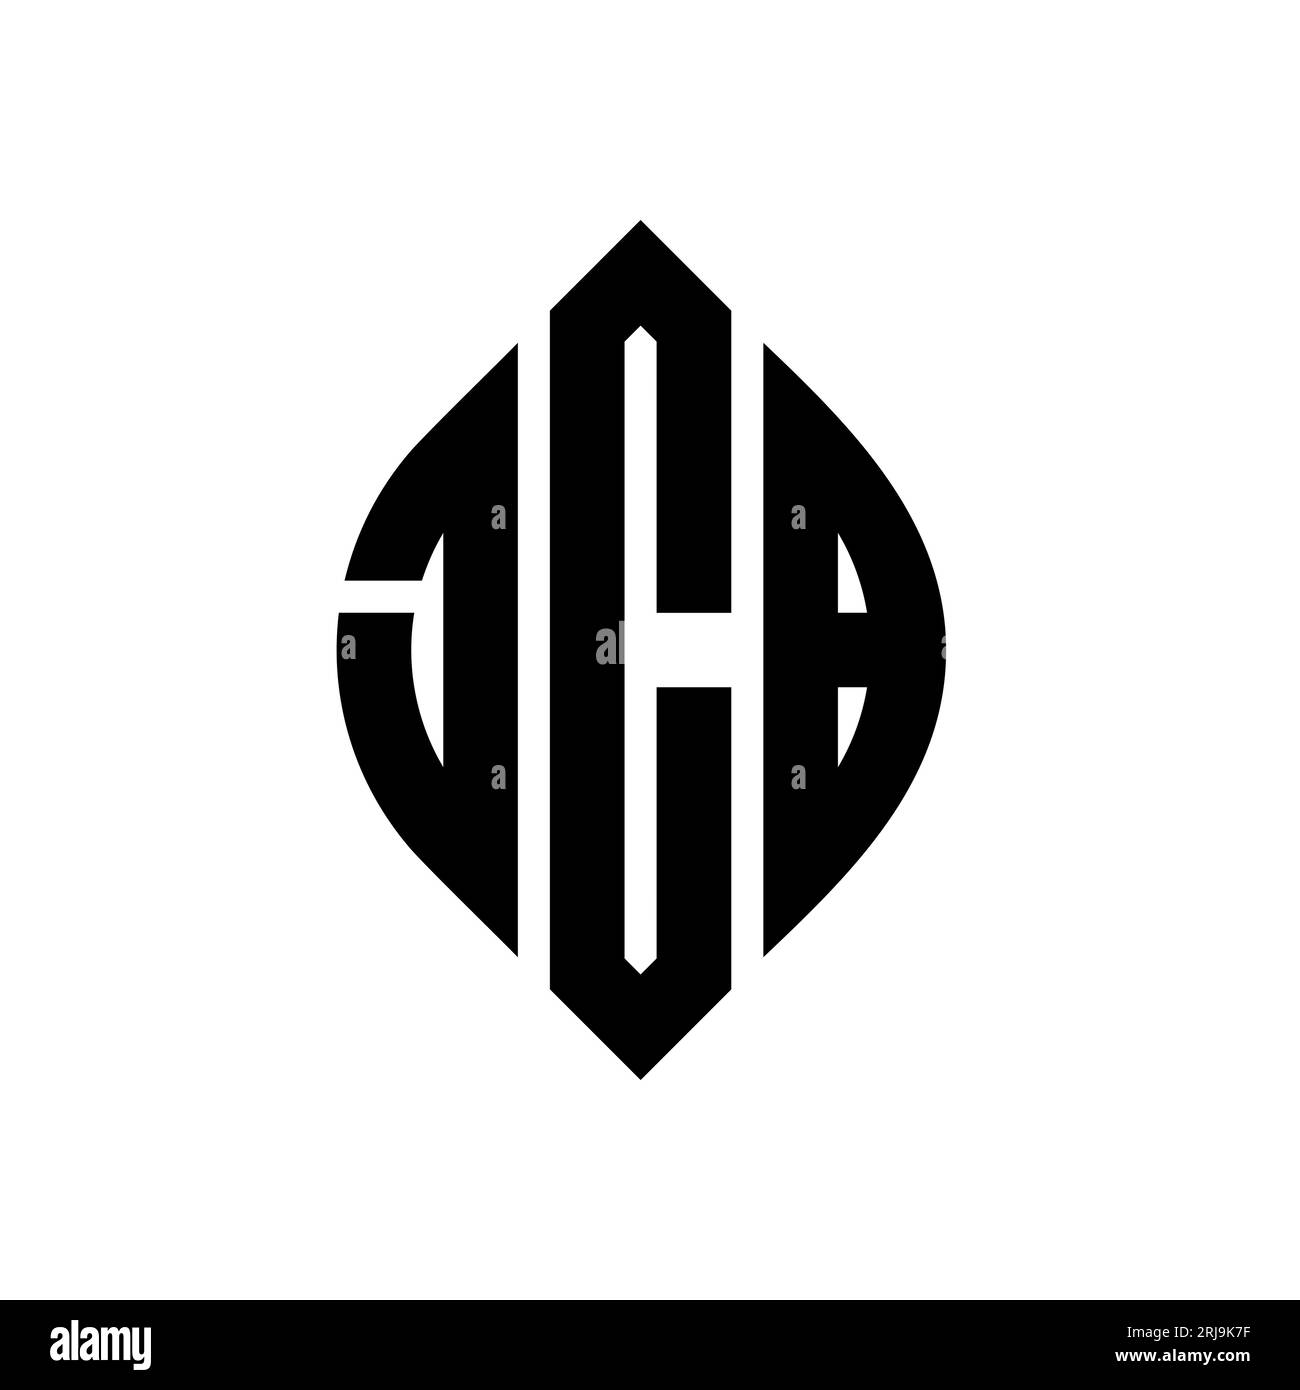 Jcb monogram Cut Out Stock Images & Pictures - Alamy